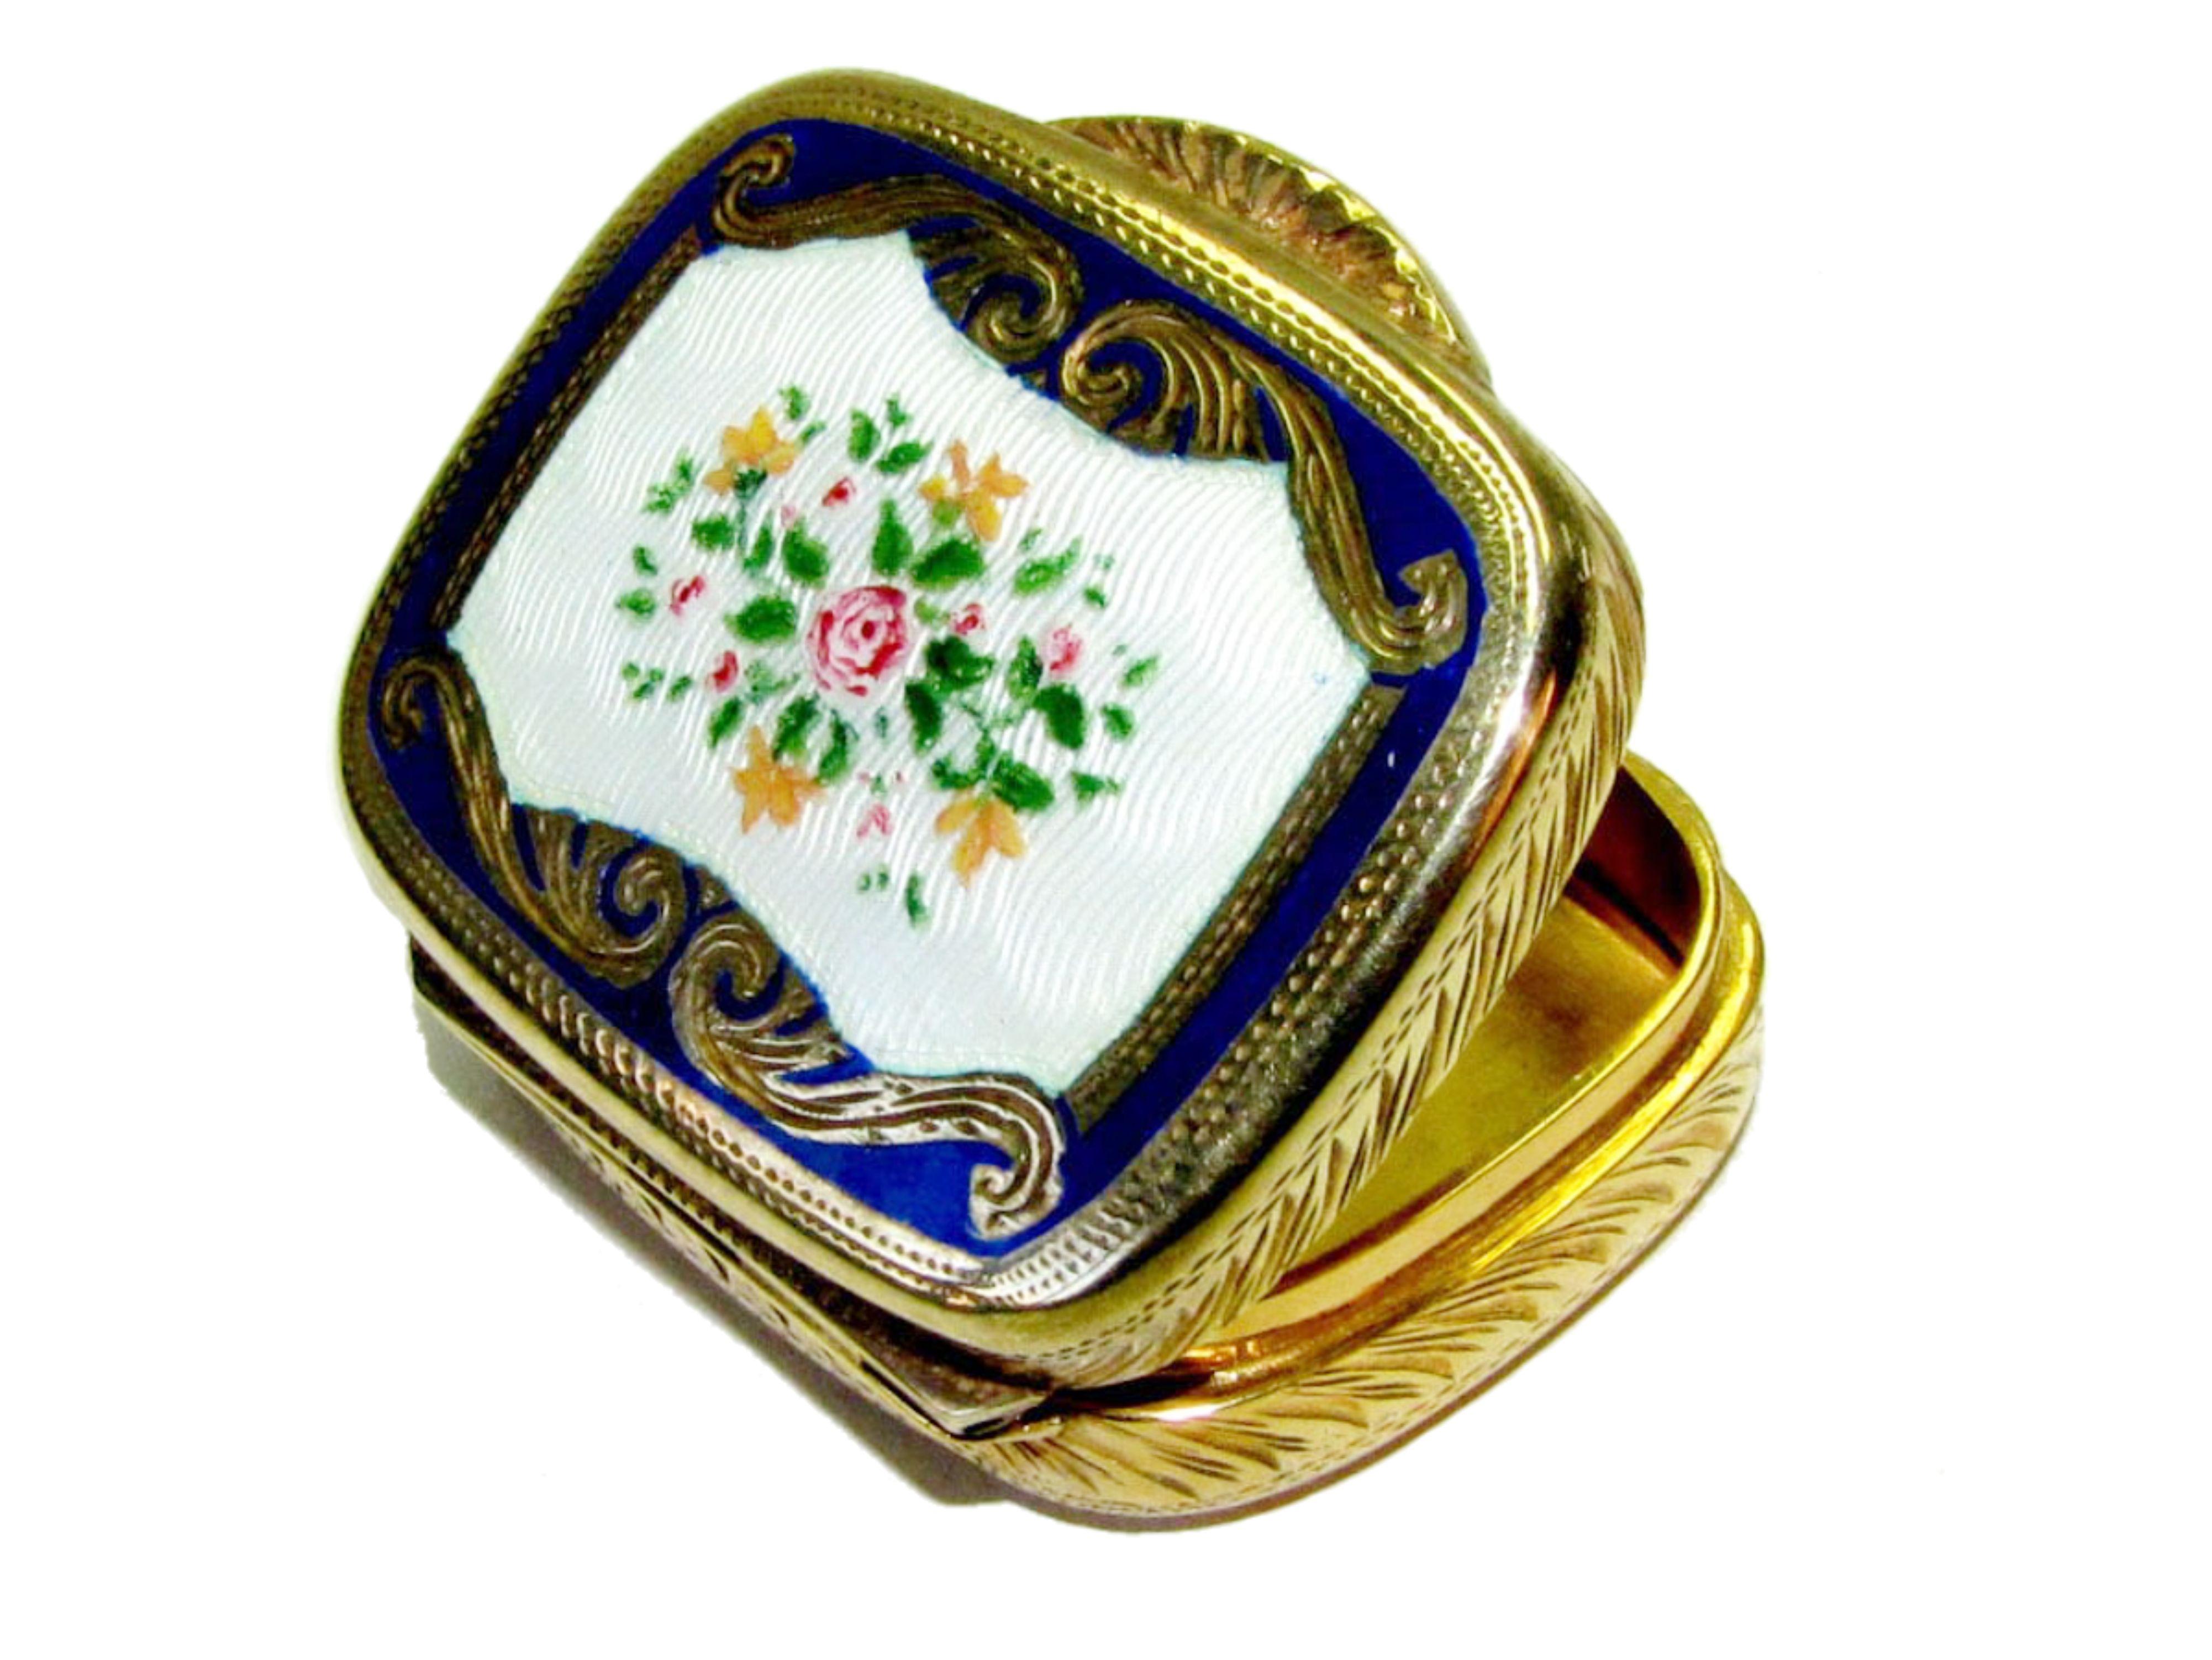 Rounded rectangular pill-box in 925/1000 sterling silver gold plated with translucent fire enamel on guilloche with hand painted bouquet of flowers and hand engravings . Size cm. 3,6 x 4,4 x 1,2 Weight gr. 46.Designed by Franco Salimbeni in 1974 and